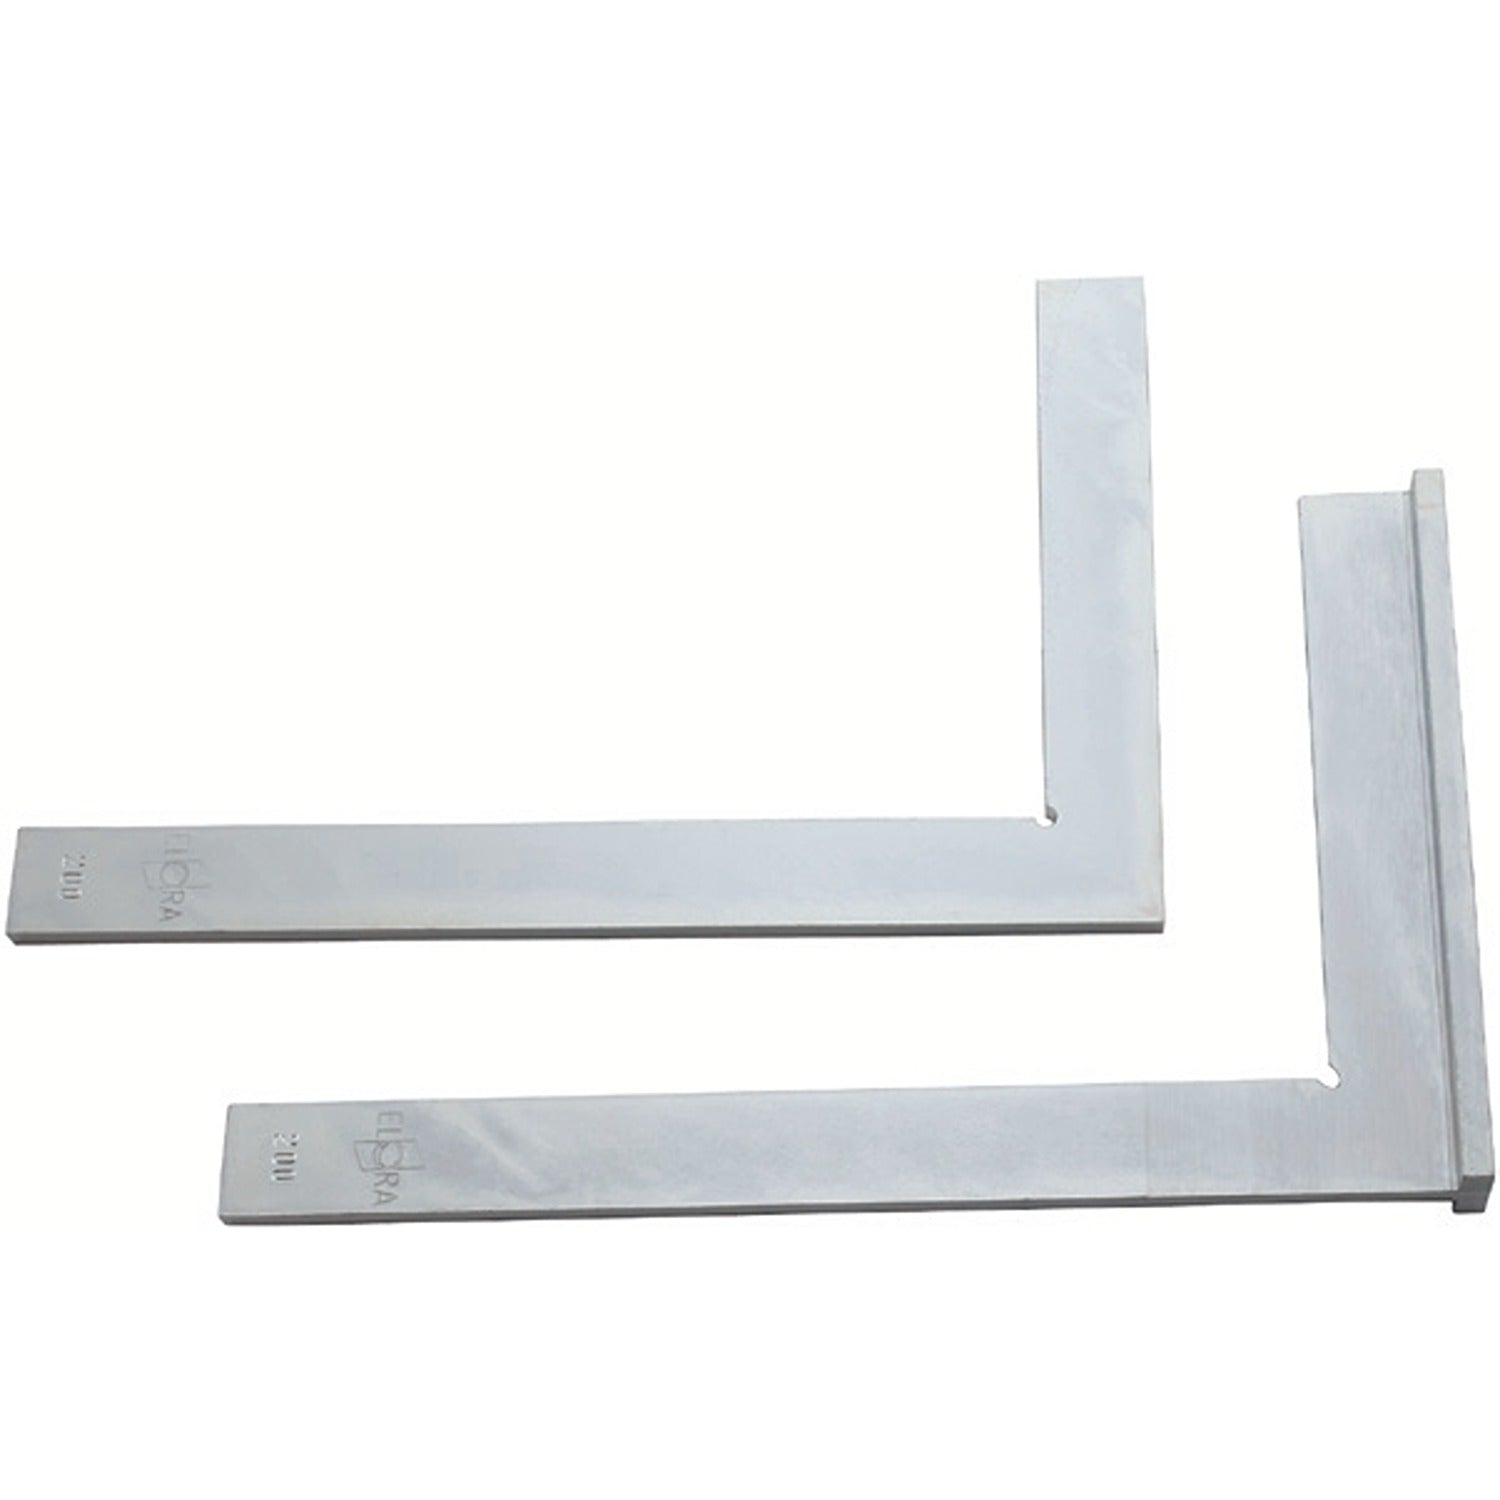 ELORA 1571-1000 Engineer Steel Square 1000x500mm (ELORA Tools) - Premium Square from ELORA - Shop now at Yew Aik.